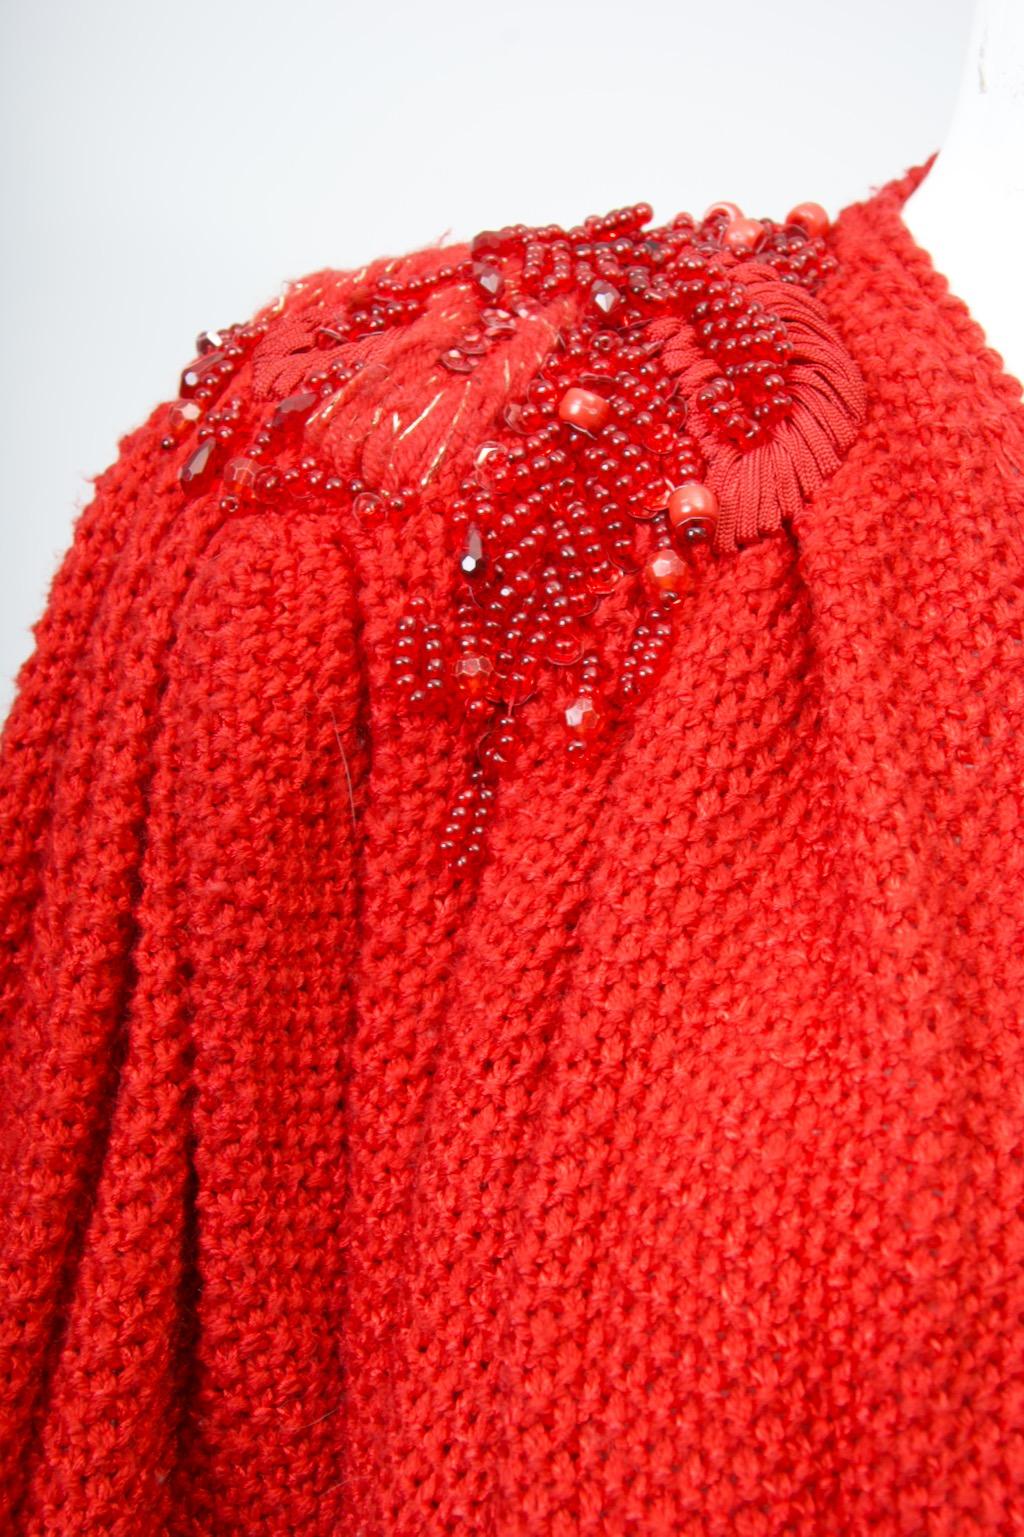 1980s red knit cardigan elaborately embellished at the shoulders with appliquéd yarn, beads, and sequins. The sweater features an oversized cut, a deep V neckline with coordinating buttons, and full sleeves that are pleated from the shoulders. The